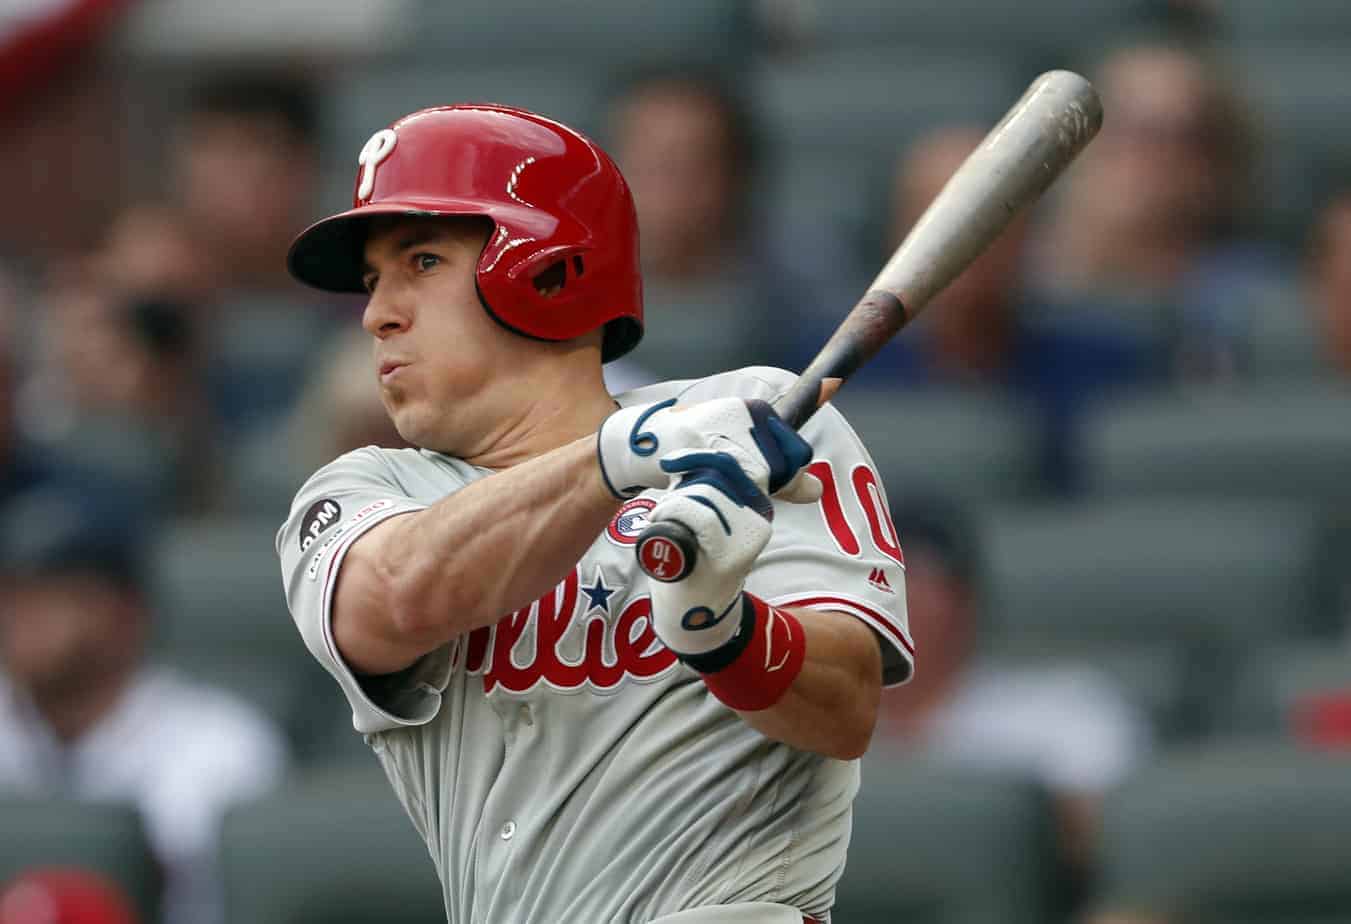 Free daily NRFI betting picks and MLB predictions. Check out the best No Run First Inning bets today, which include the Phillies vs. Nationals 6/16